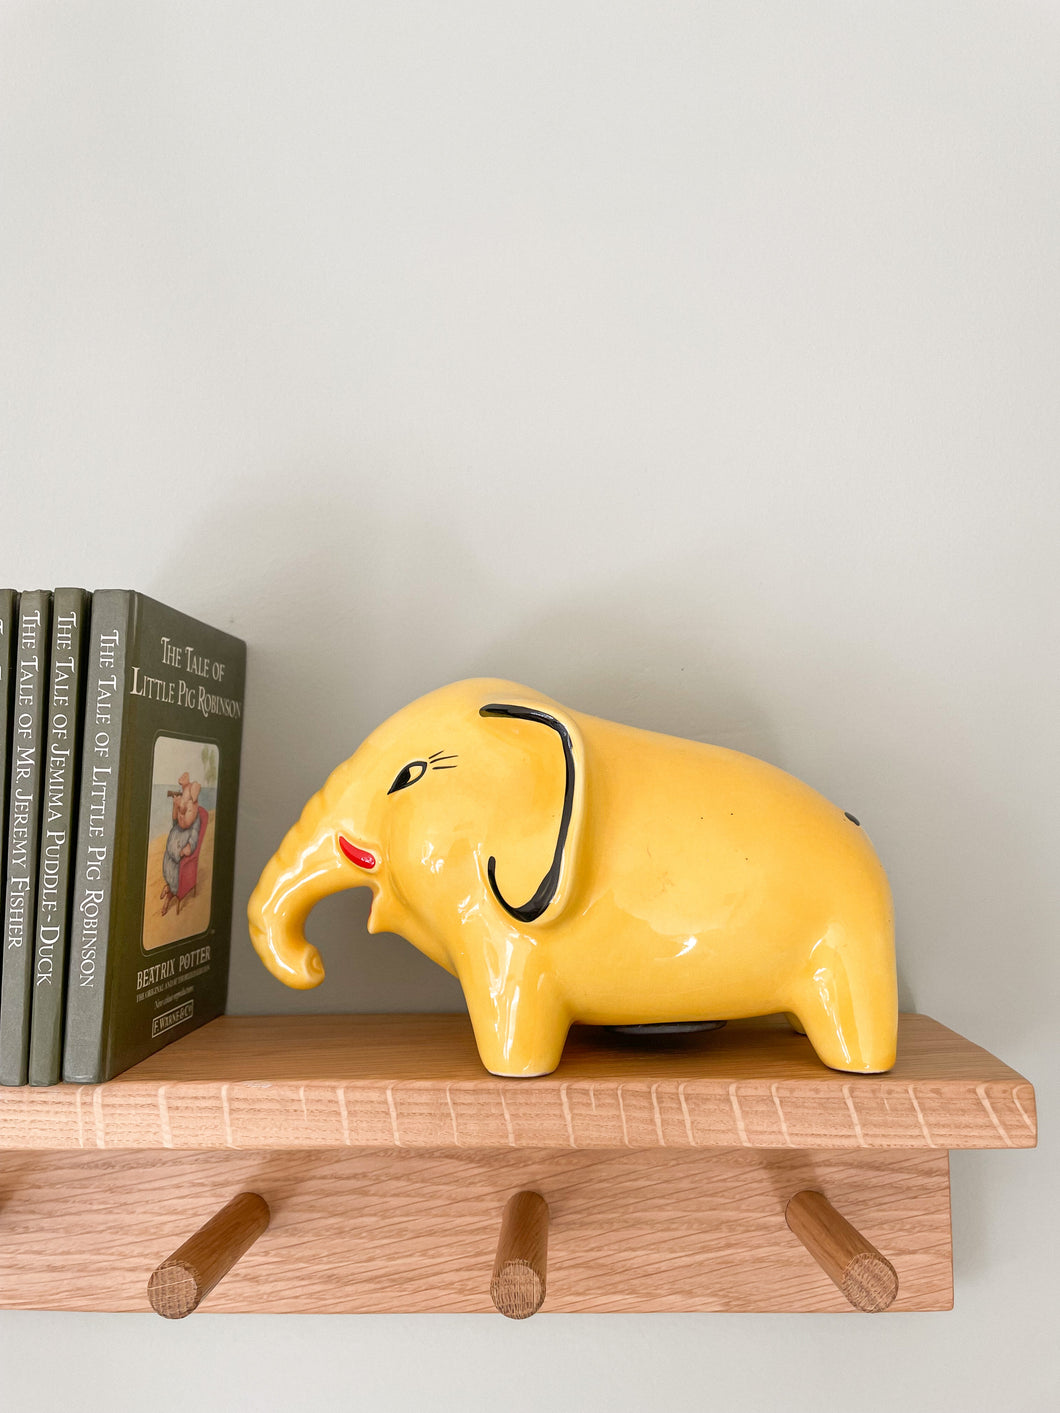 Vintage ceramic elephant piggy bank or money box in yellow, by Arthur Wood, made in Britain - Moppet